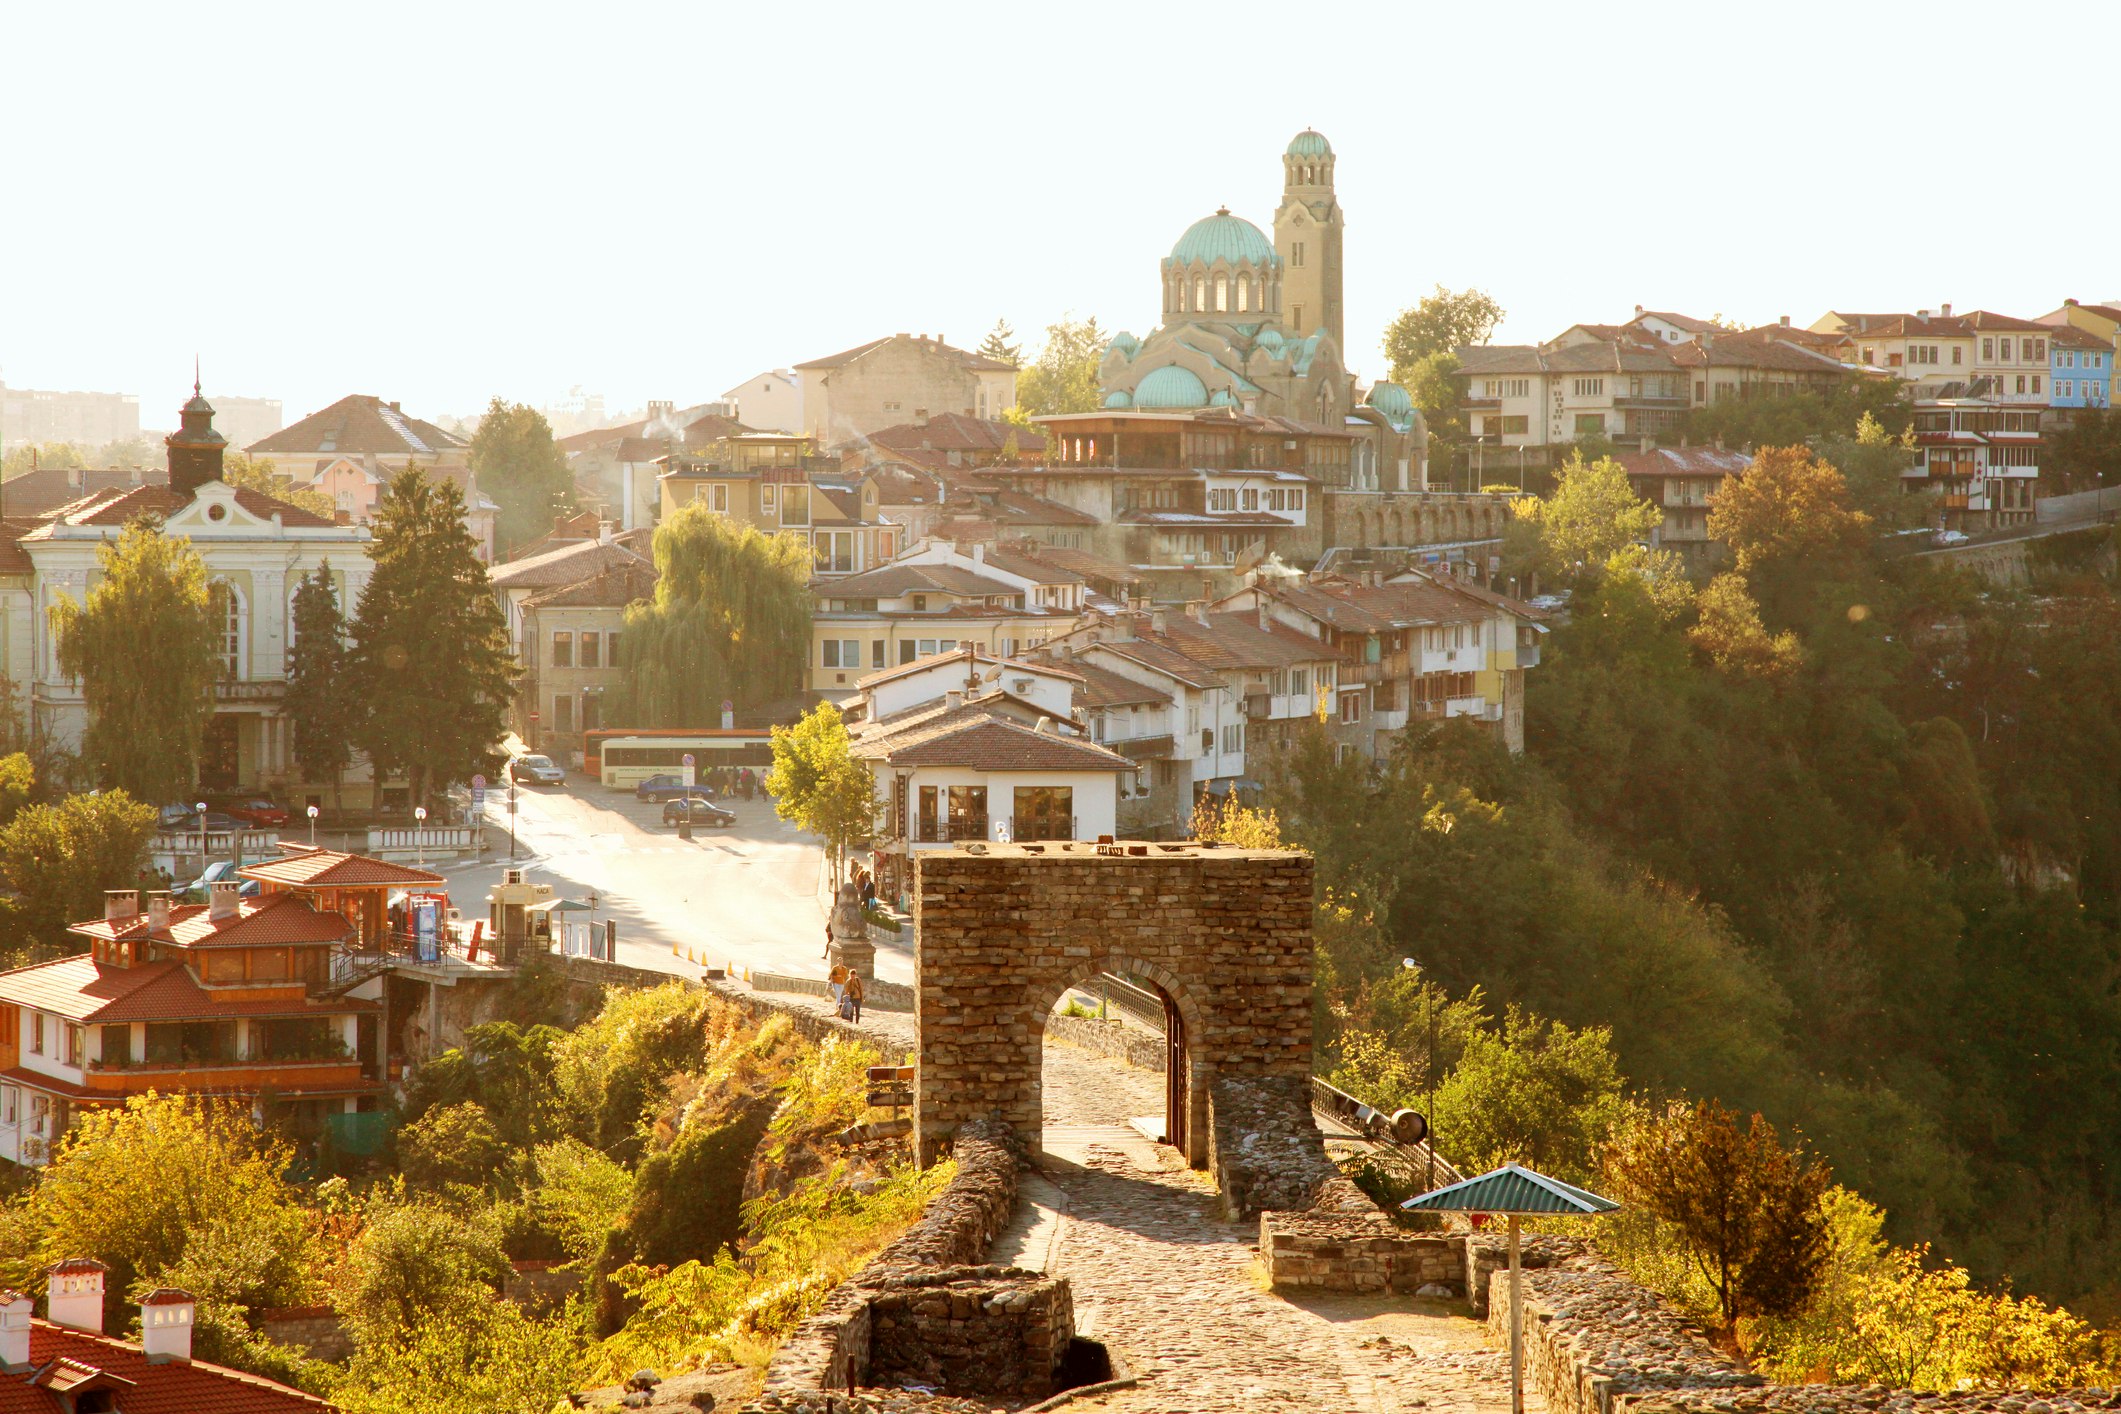 A warm, slightly hazy shot with the tones of a vintage photo showing the hillside town of Sofia, Bulgaria. A simple stone arch in the foreground guides the viewer's eye up a broad street between the medieval houses and towards the large Saint Aleksandar Nevski Cathedral on the hill in the central background.